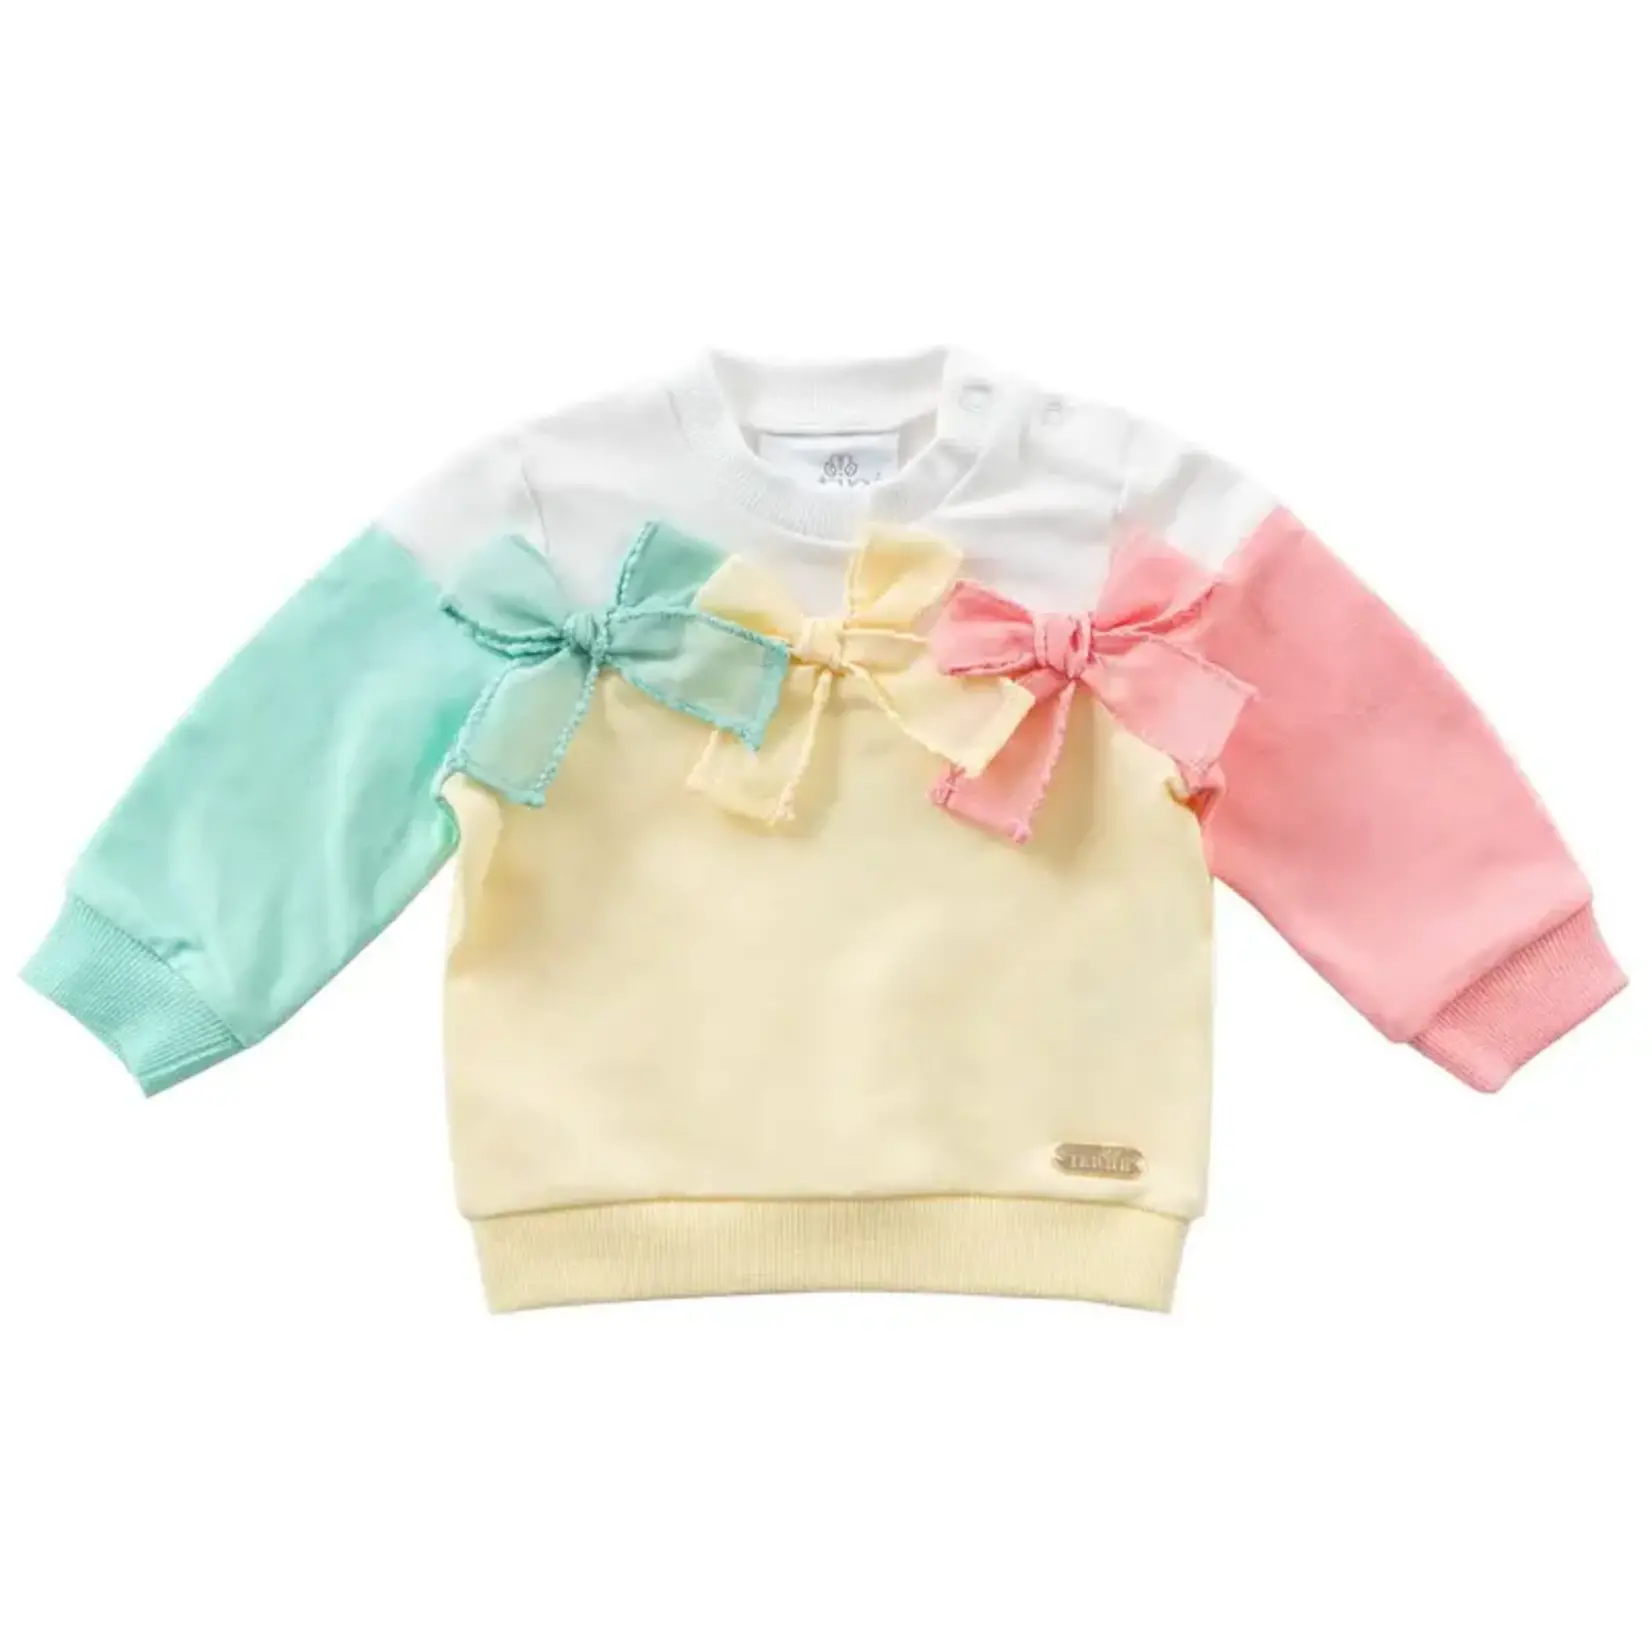 Natini SWEATER BOW  -  MIX COLORS